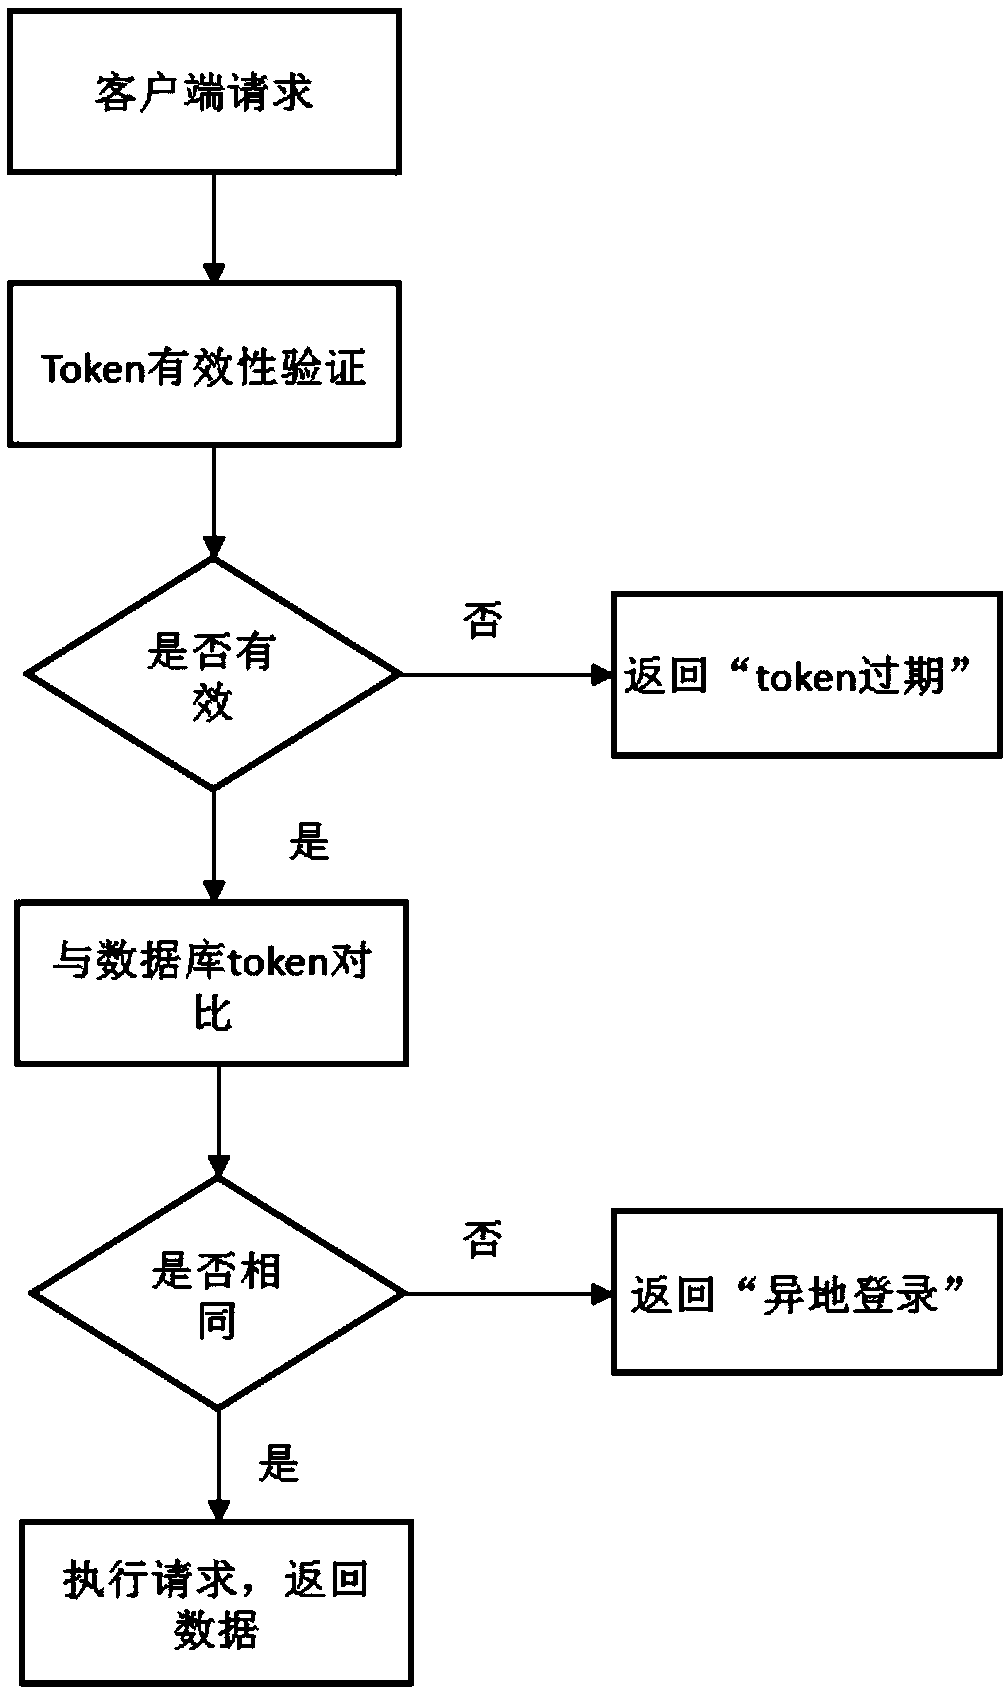 Token-based client identity verification method and system